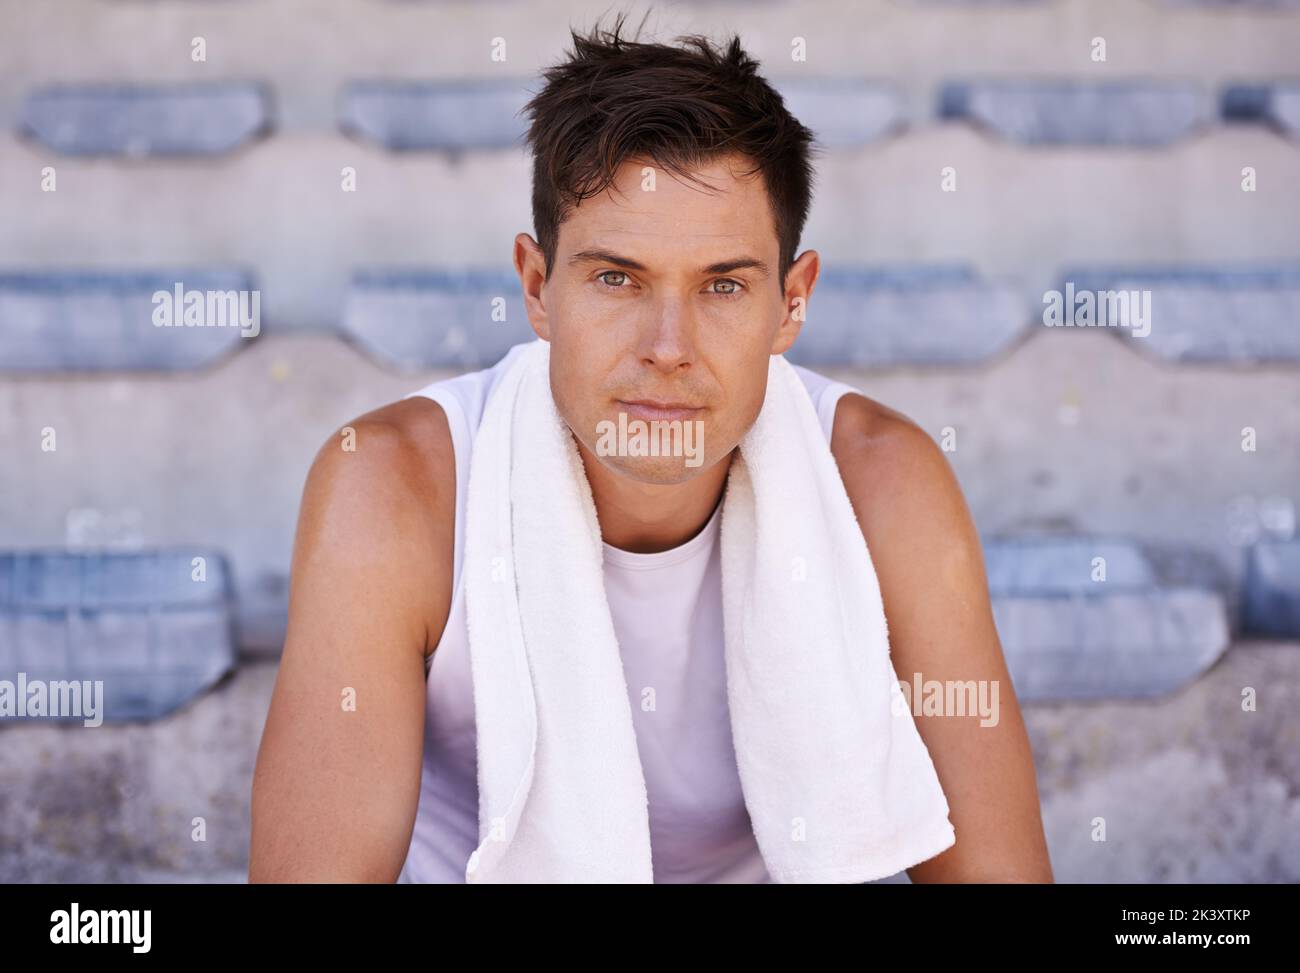 The exhaustion is worth it. Portrait of an athlete taking a break from training. Stock Photo